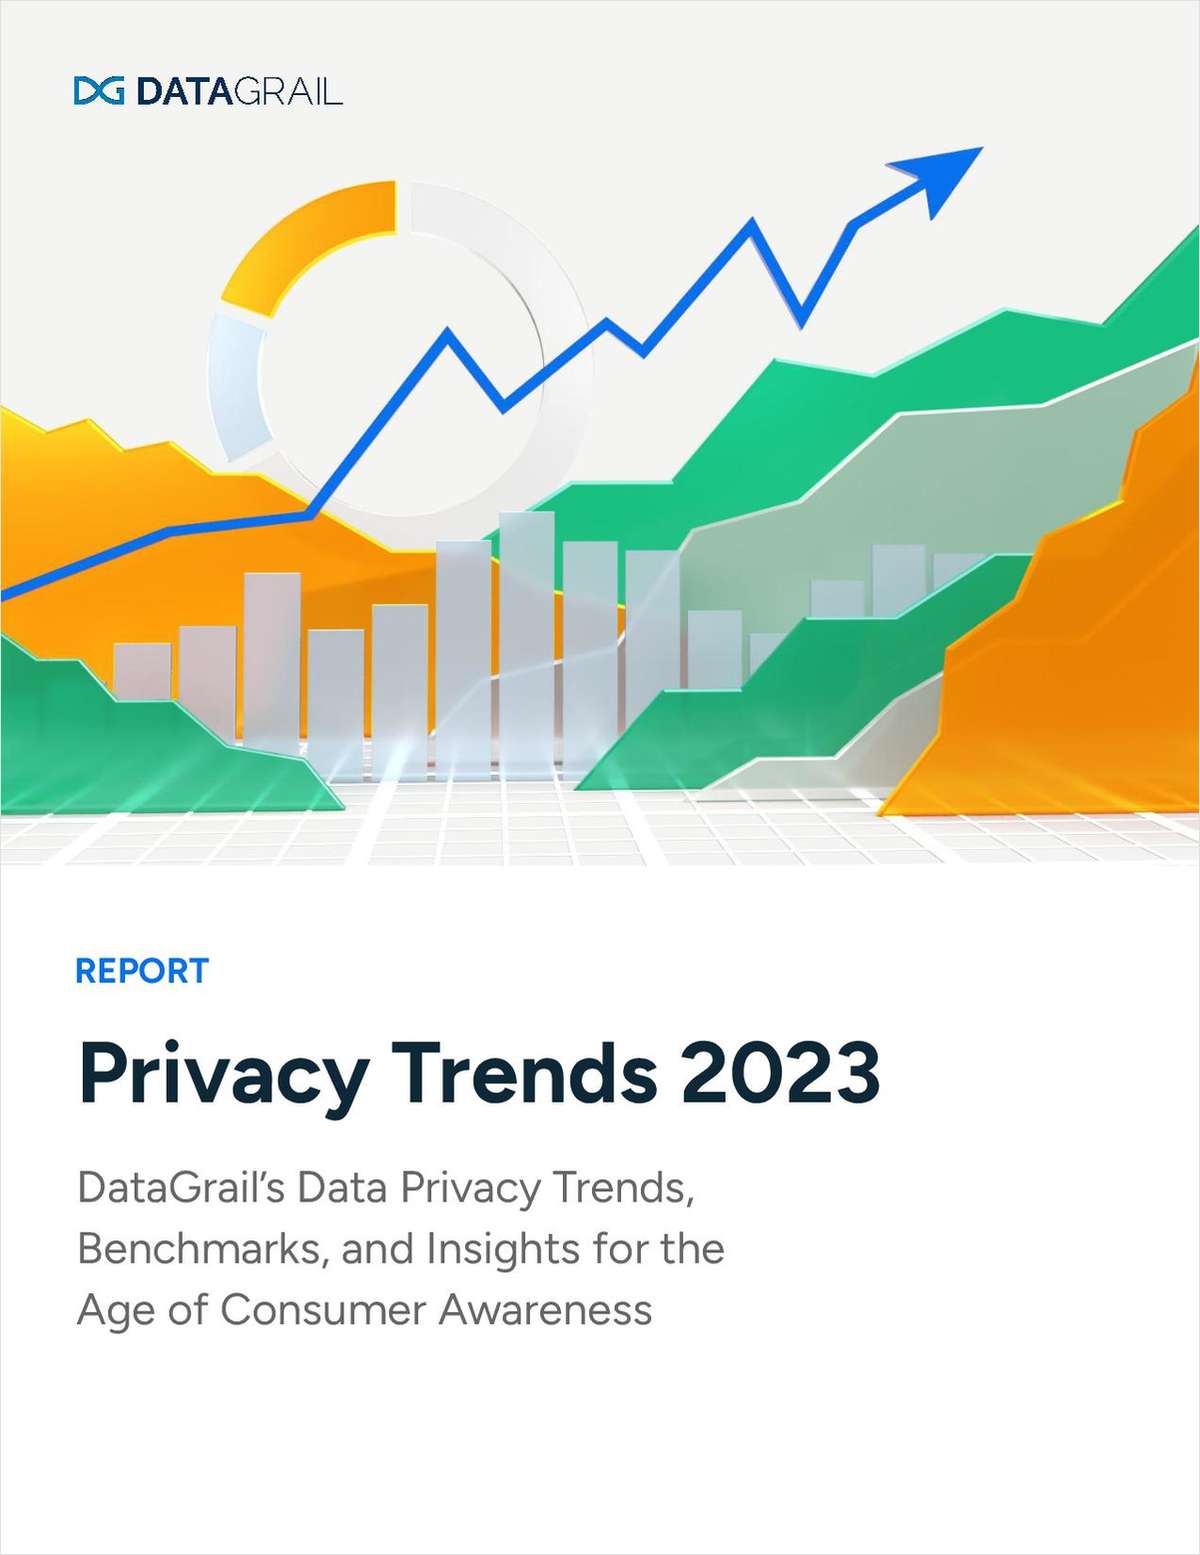 Privacy Trends 2023: Benchmarks and Insights for Security Leaders